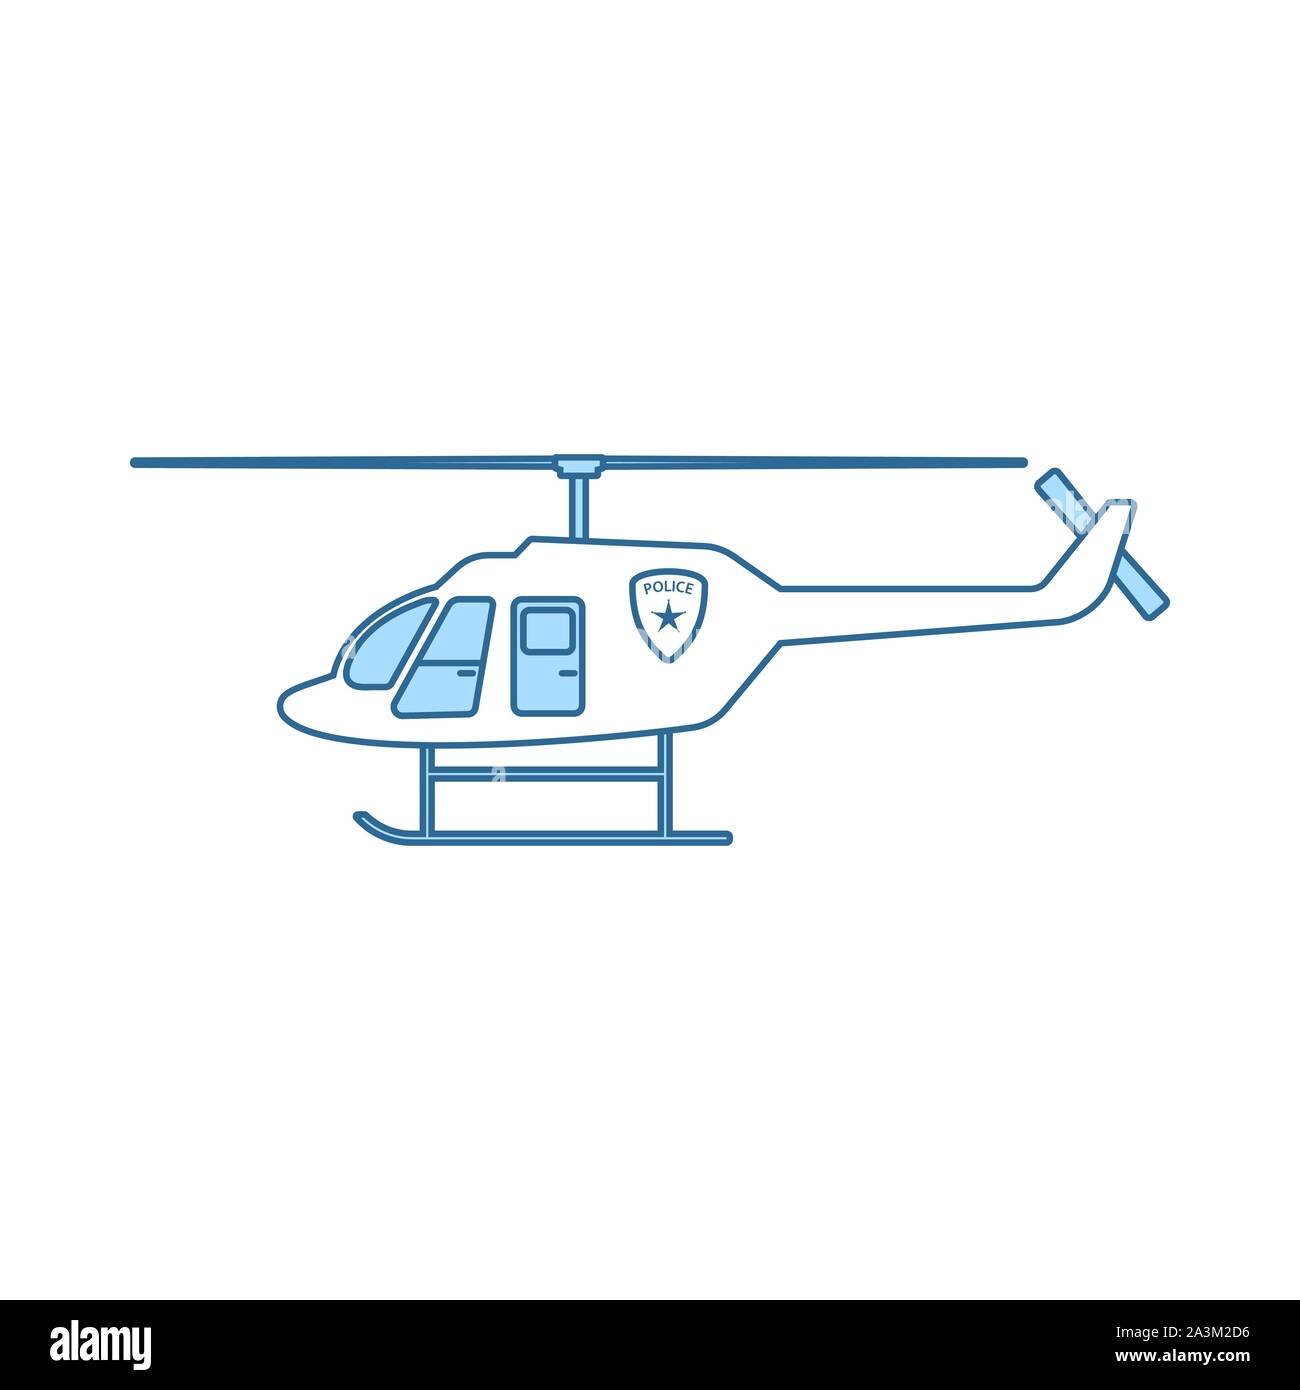 police helicopter drawing